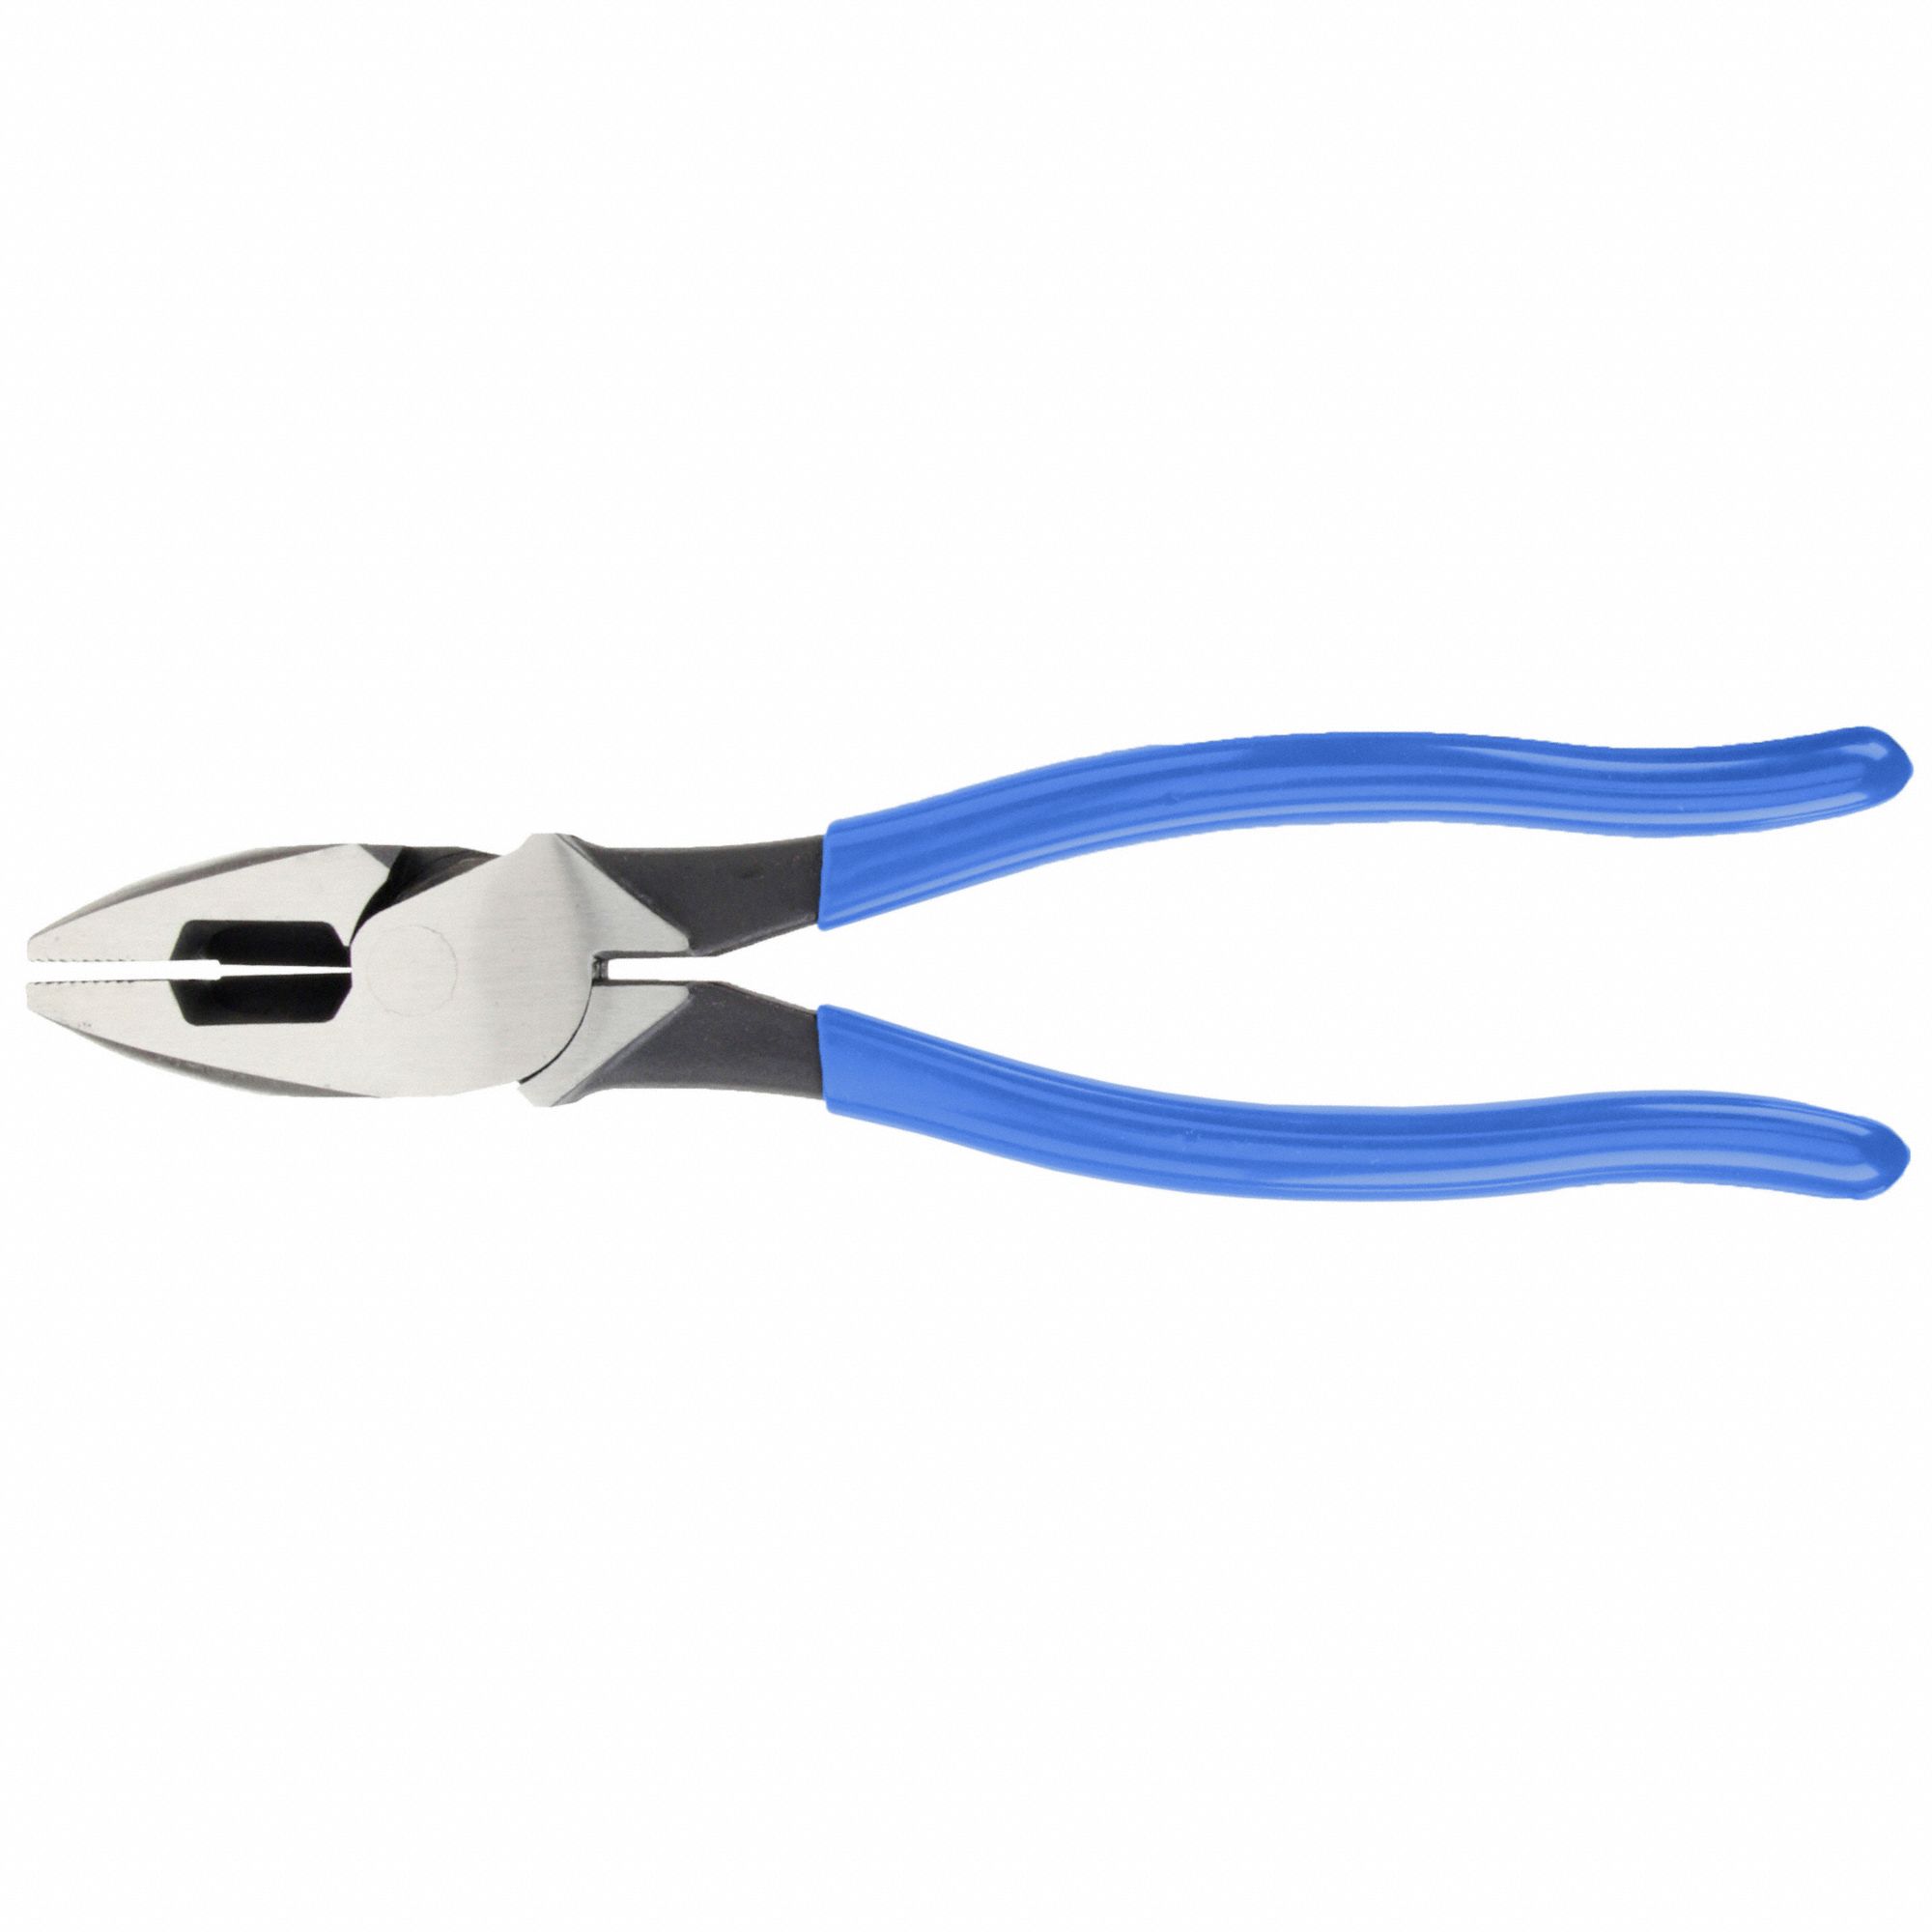 Channellock E338 XLT 8.25-inch Lap Joint Diagonal Cutting Pliers with Blue Grips 